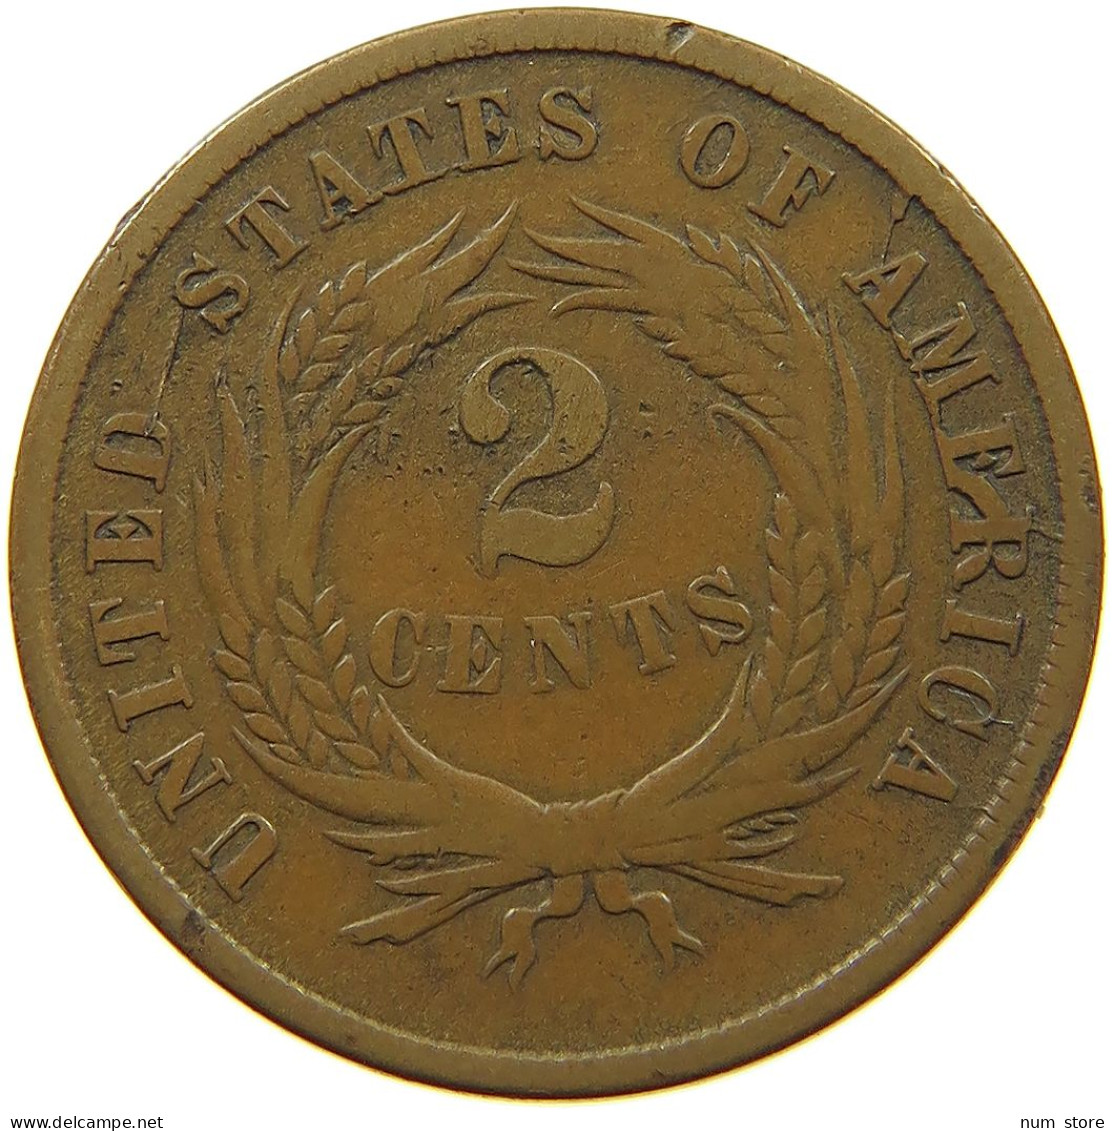 UNITED STATES OF AMERICA 2 CENTS 1865  #c010 0121 - 2, 3 & 20 Cent